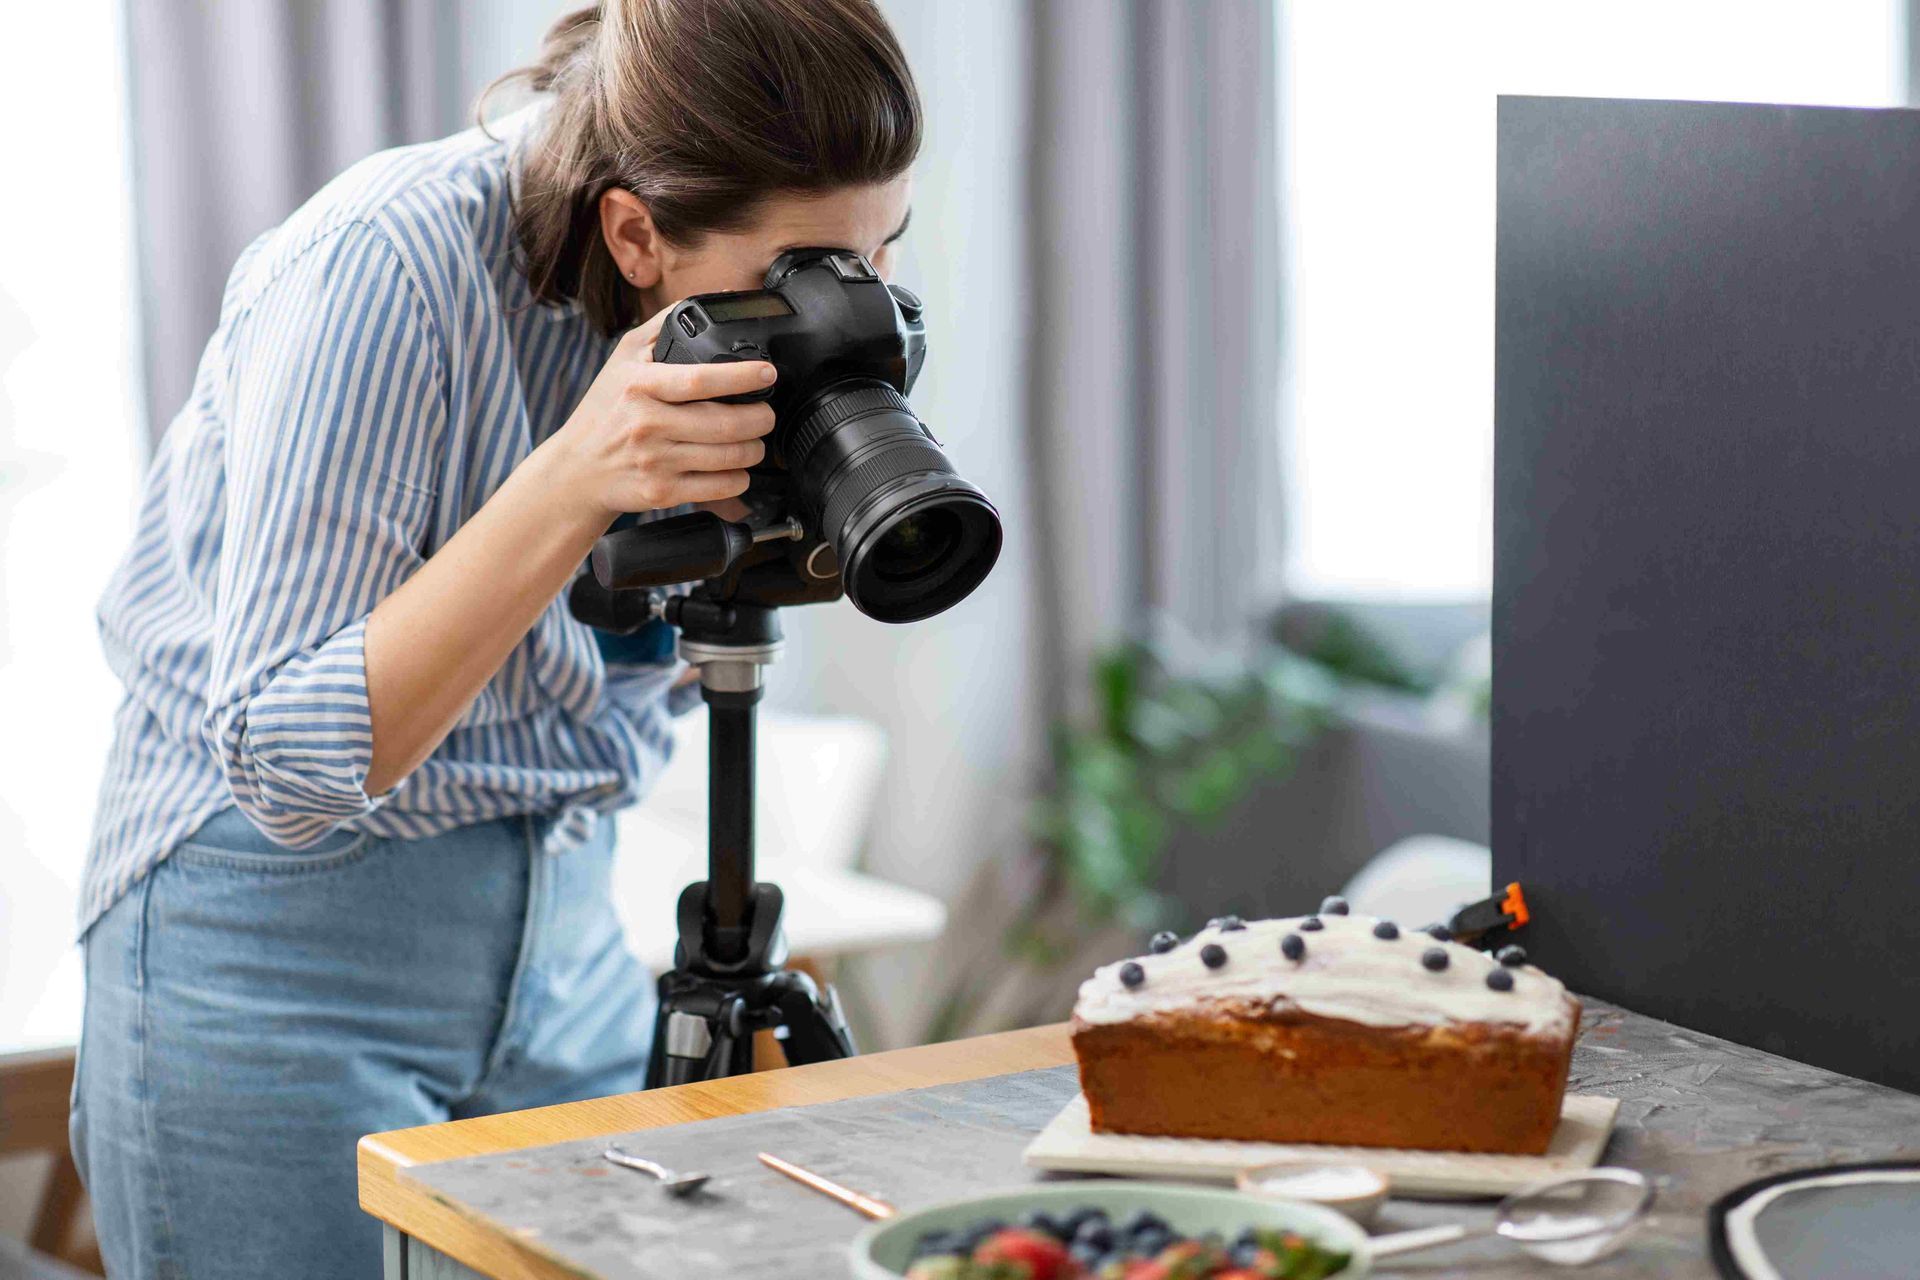 A woman photographer photographing a cake